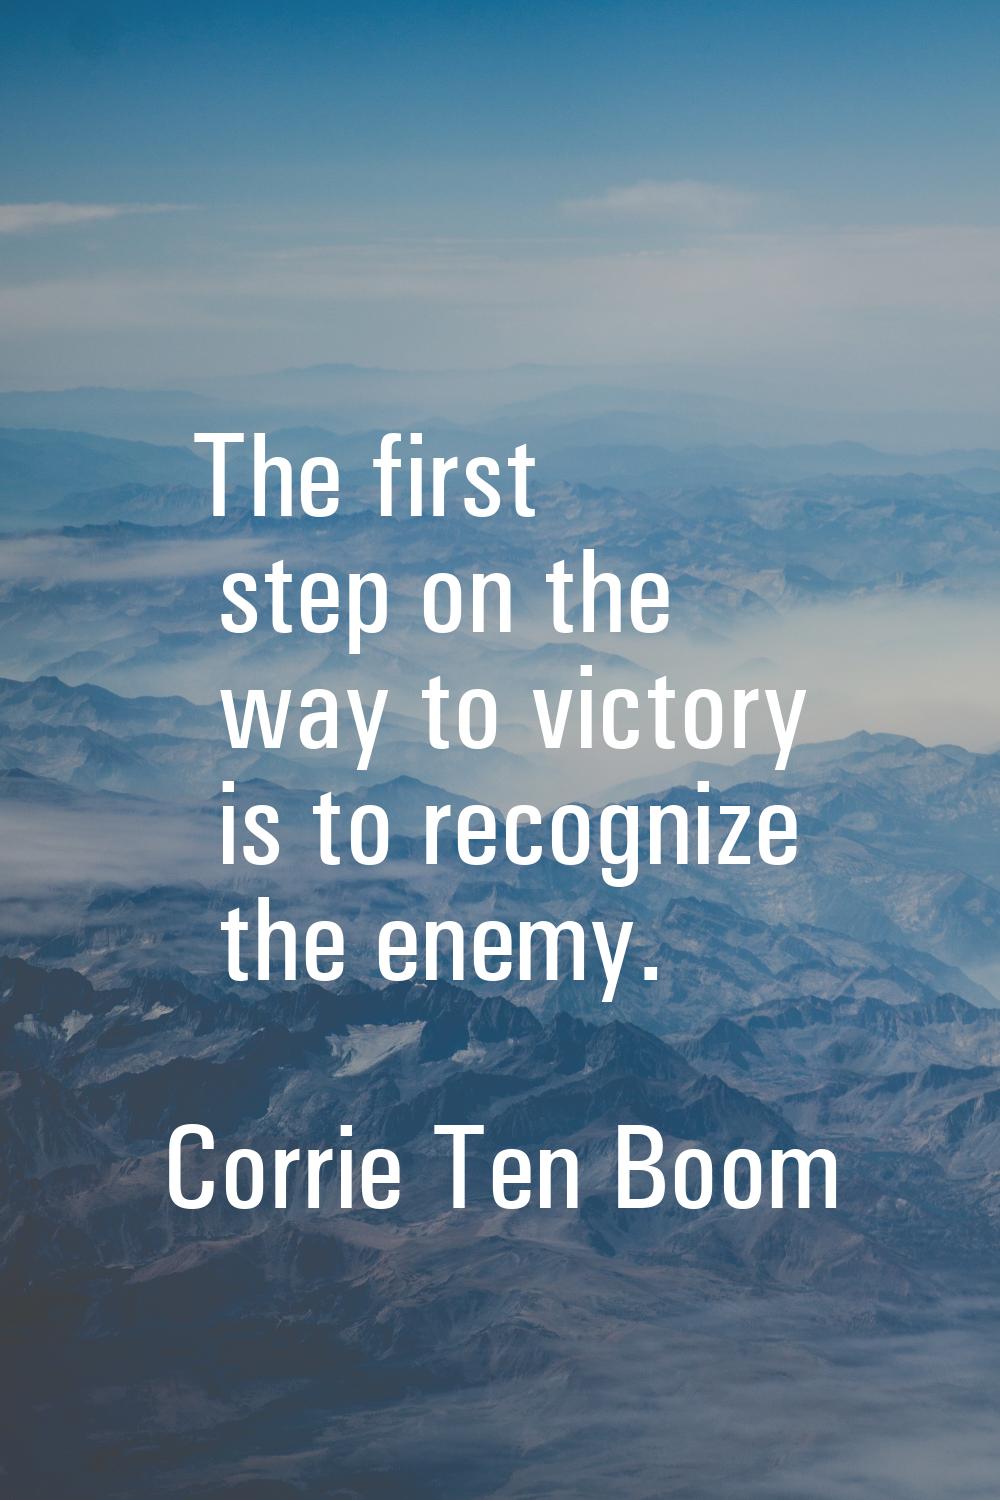 The first step on the way to victory is to recognize the enemy.